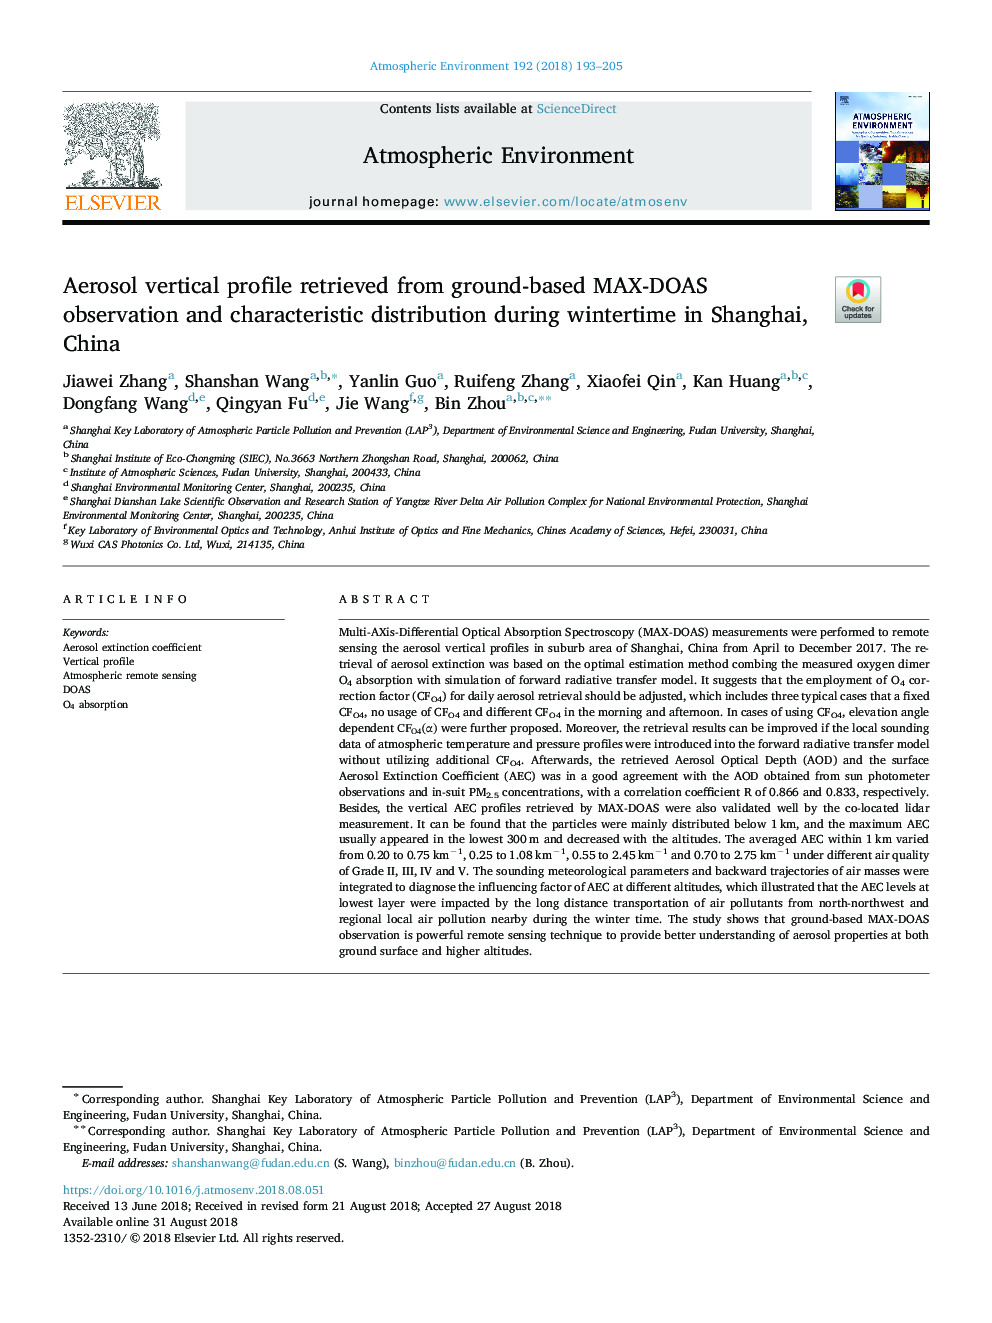 Aerosol vertical profile retrieved from ground-based MAX-DOAS observation and characteristic distribution during wintertime in Shanghai, China